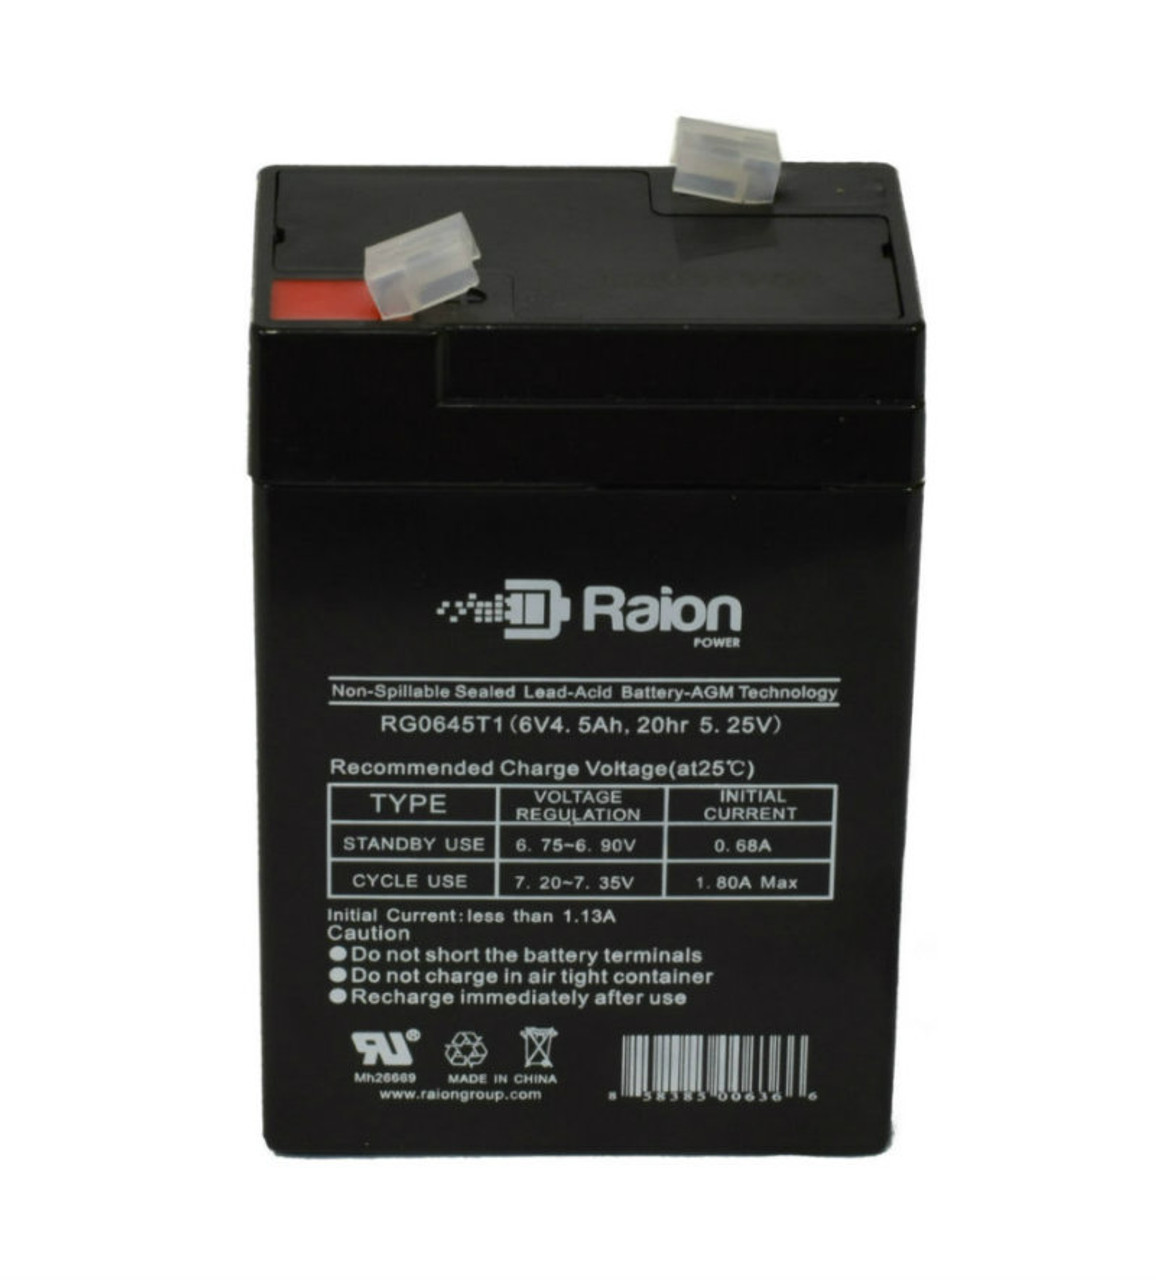 Raion Power RG0645T1 Replacement Battery Cartridge for OUTDO OT4-6